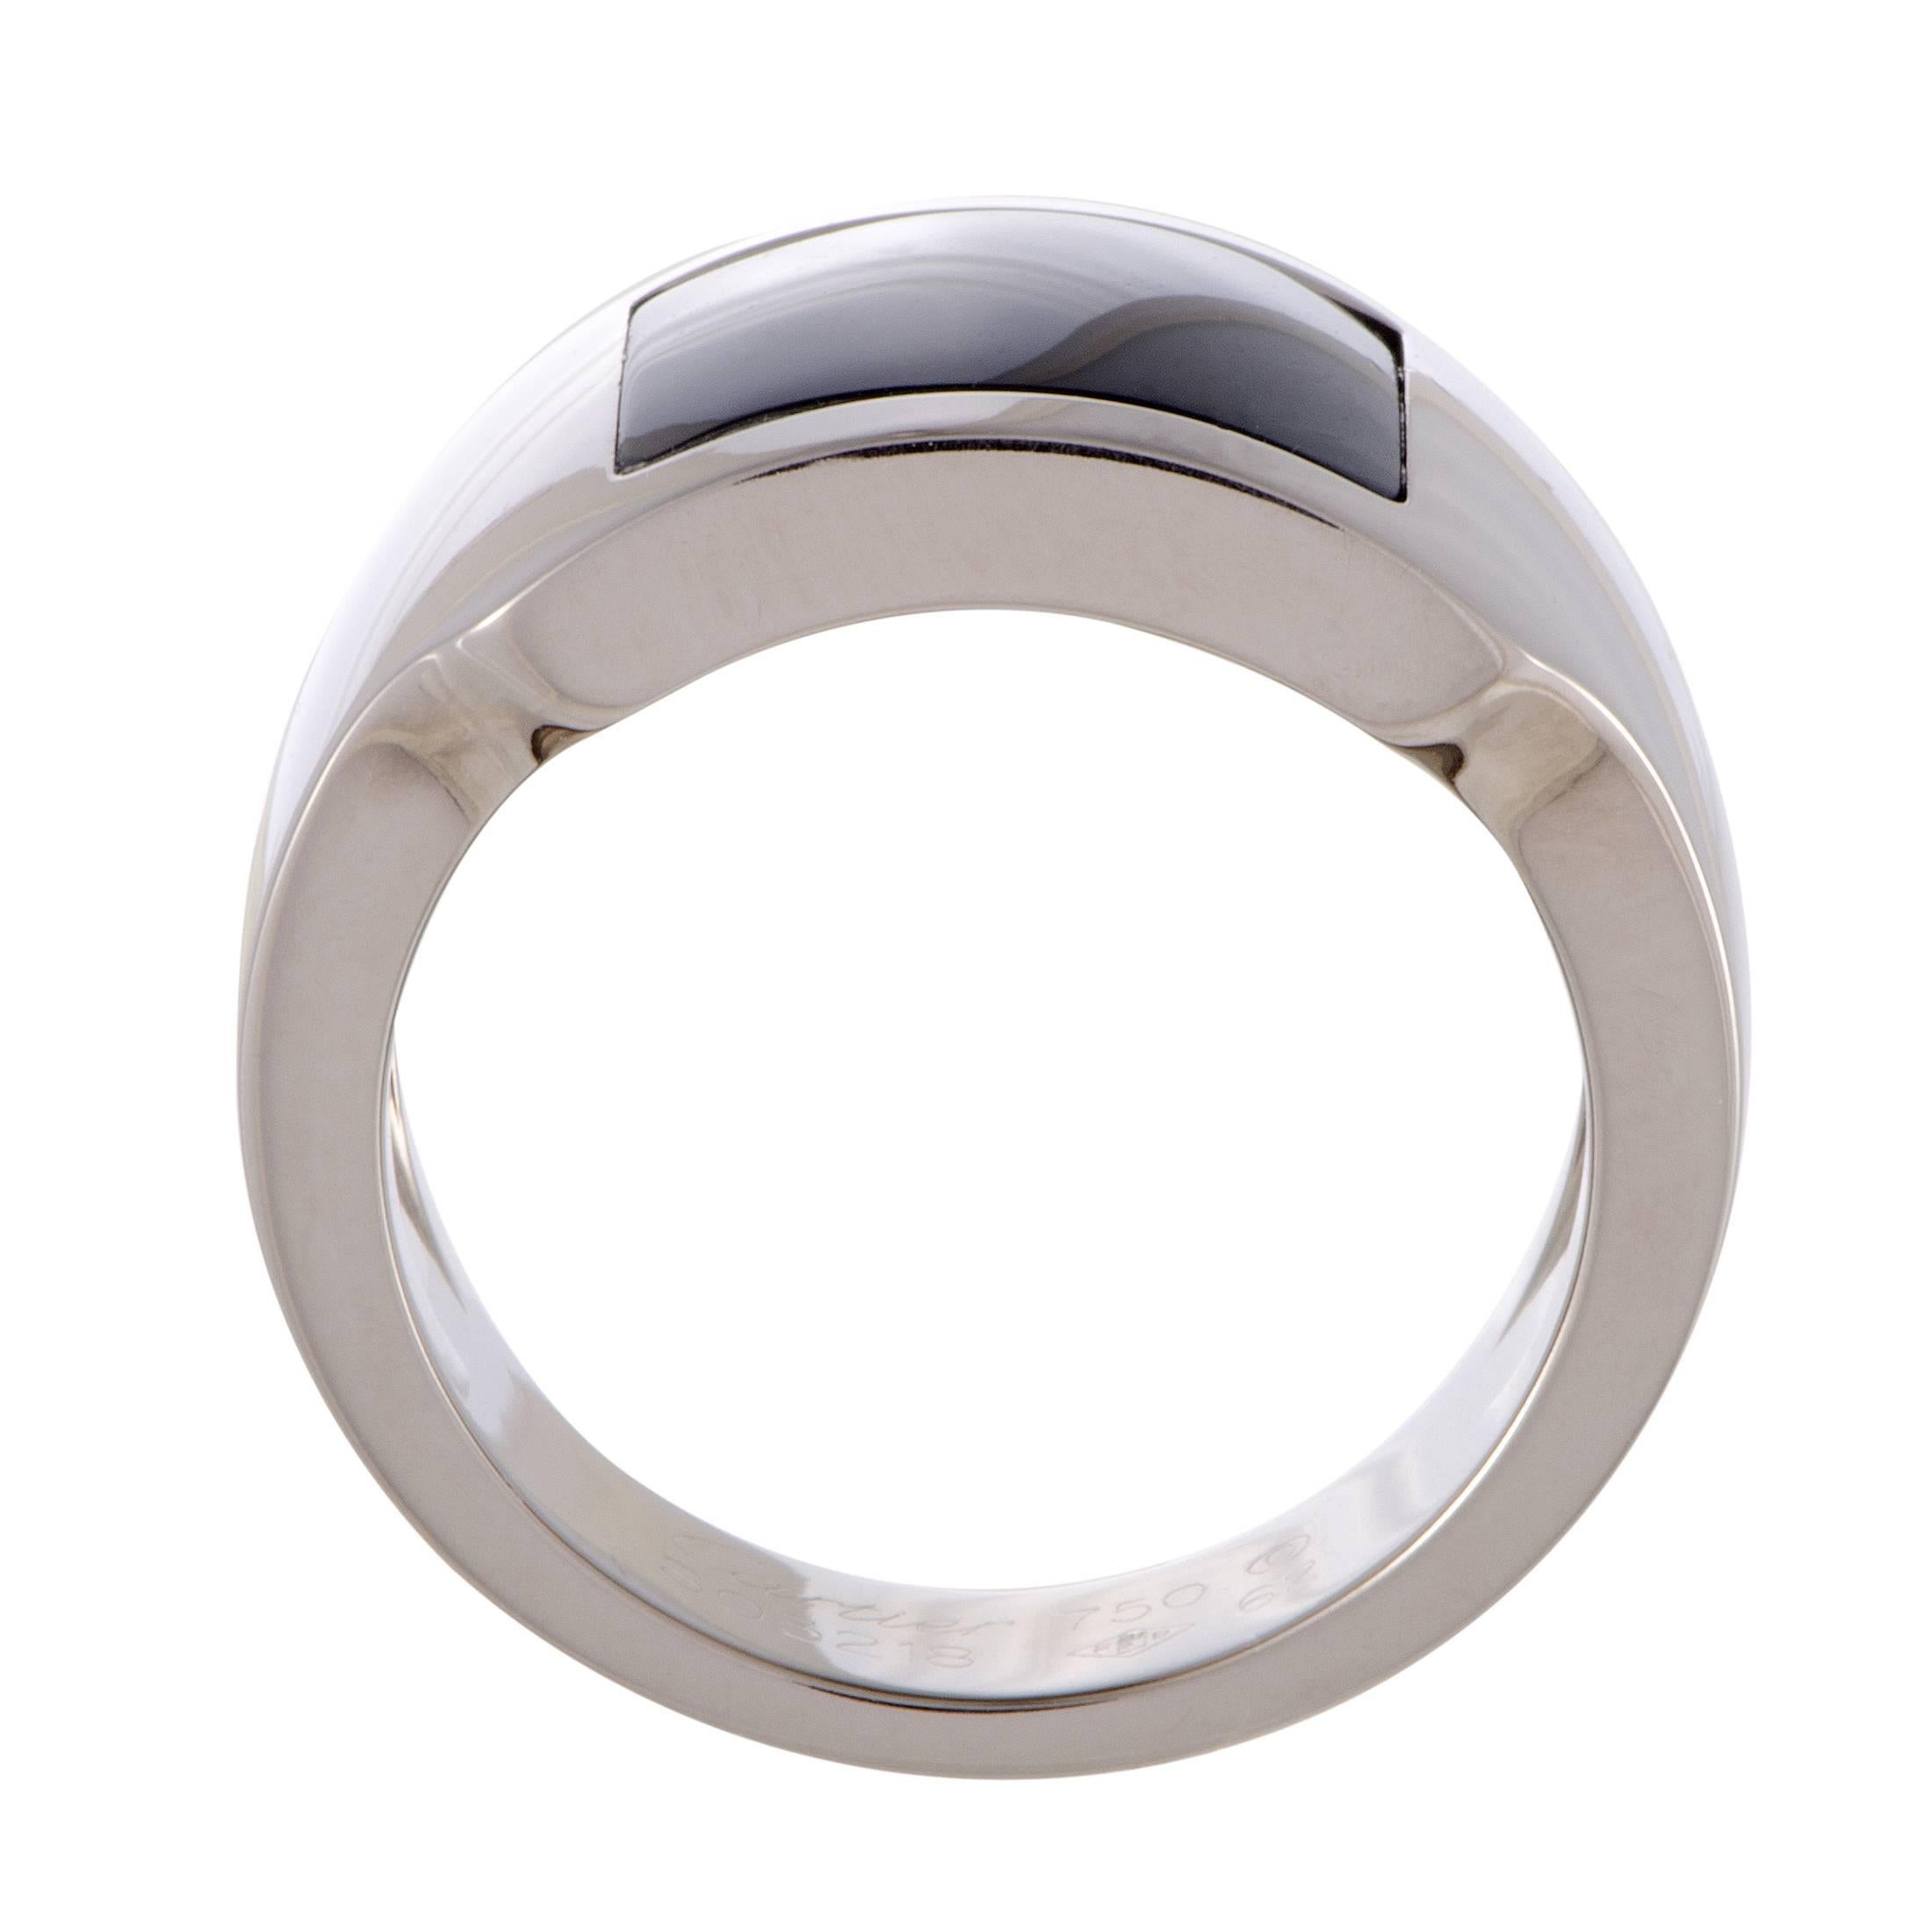 Exuding fascinating excellence and slightly unconventional elegance, this bold and exquisitely crafted ring from Cartier is comprised of a tastefully contrasting combination of spotlessly polished 18K white gold and smooth onyx inlay.
Ring Size: